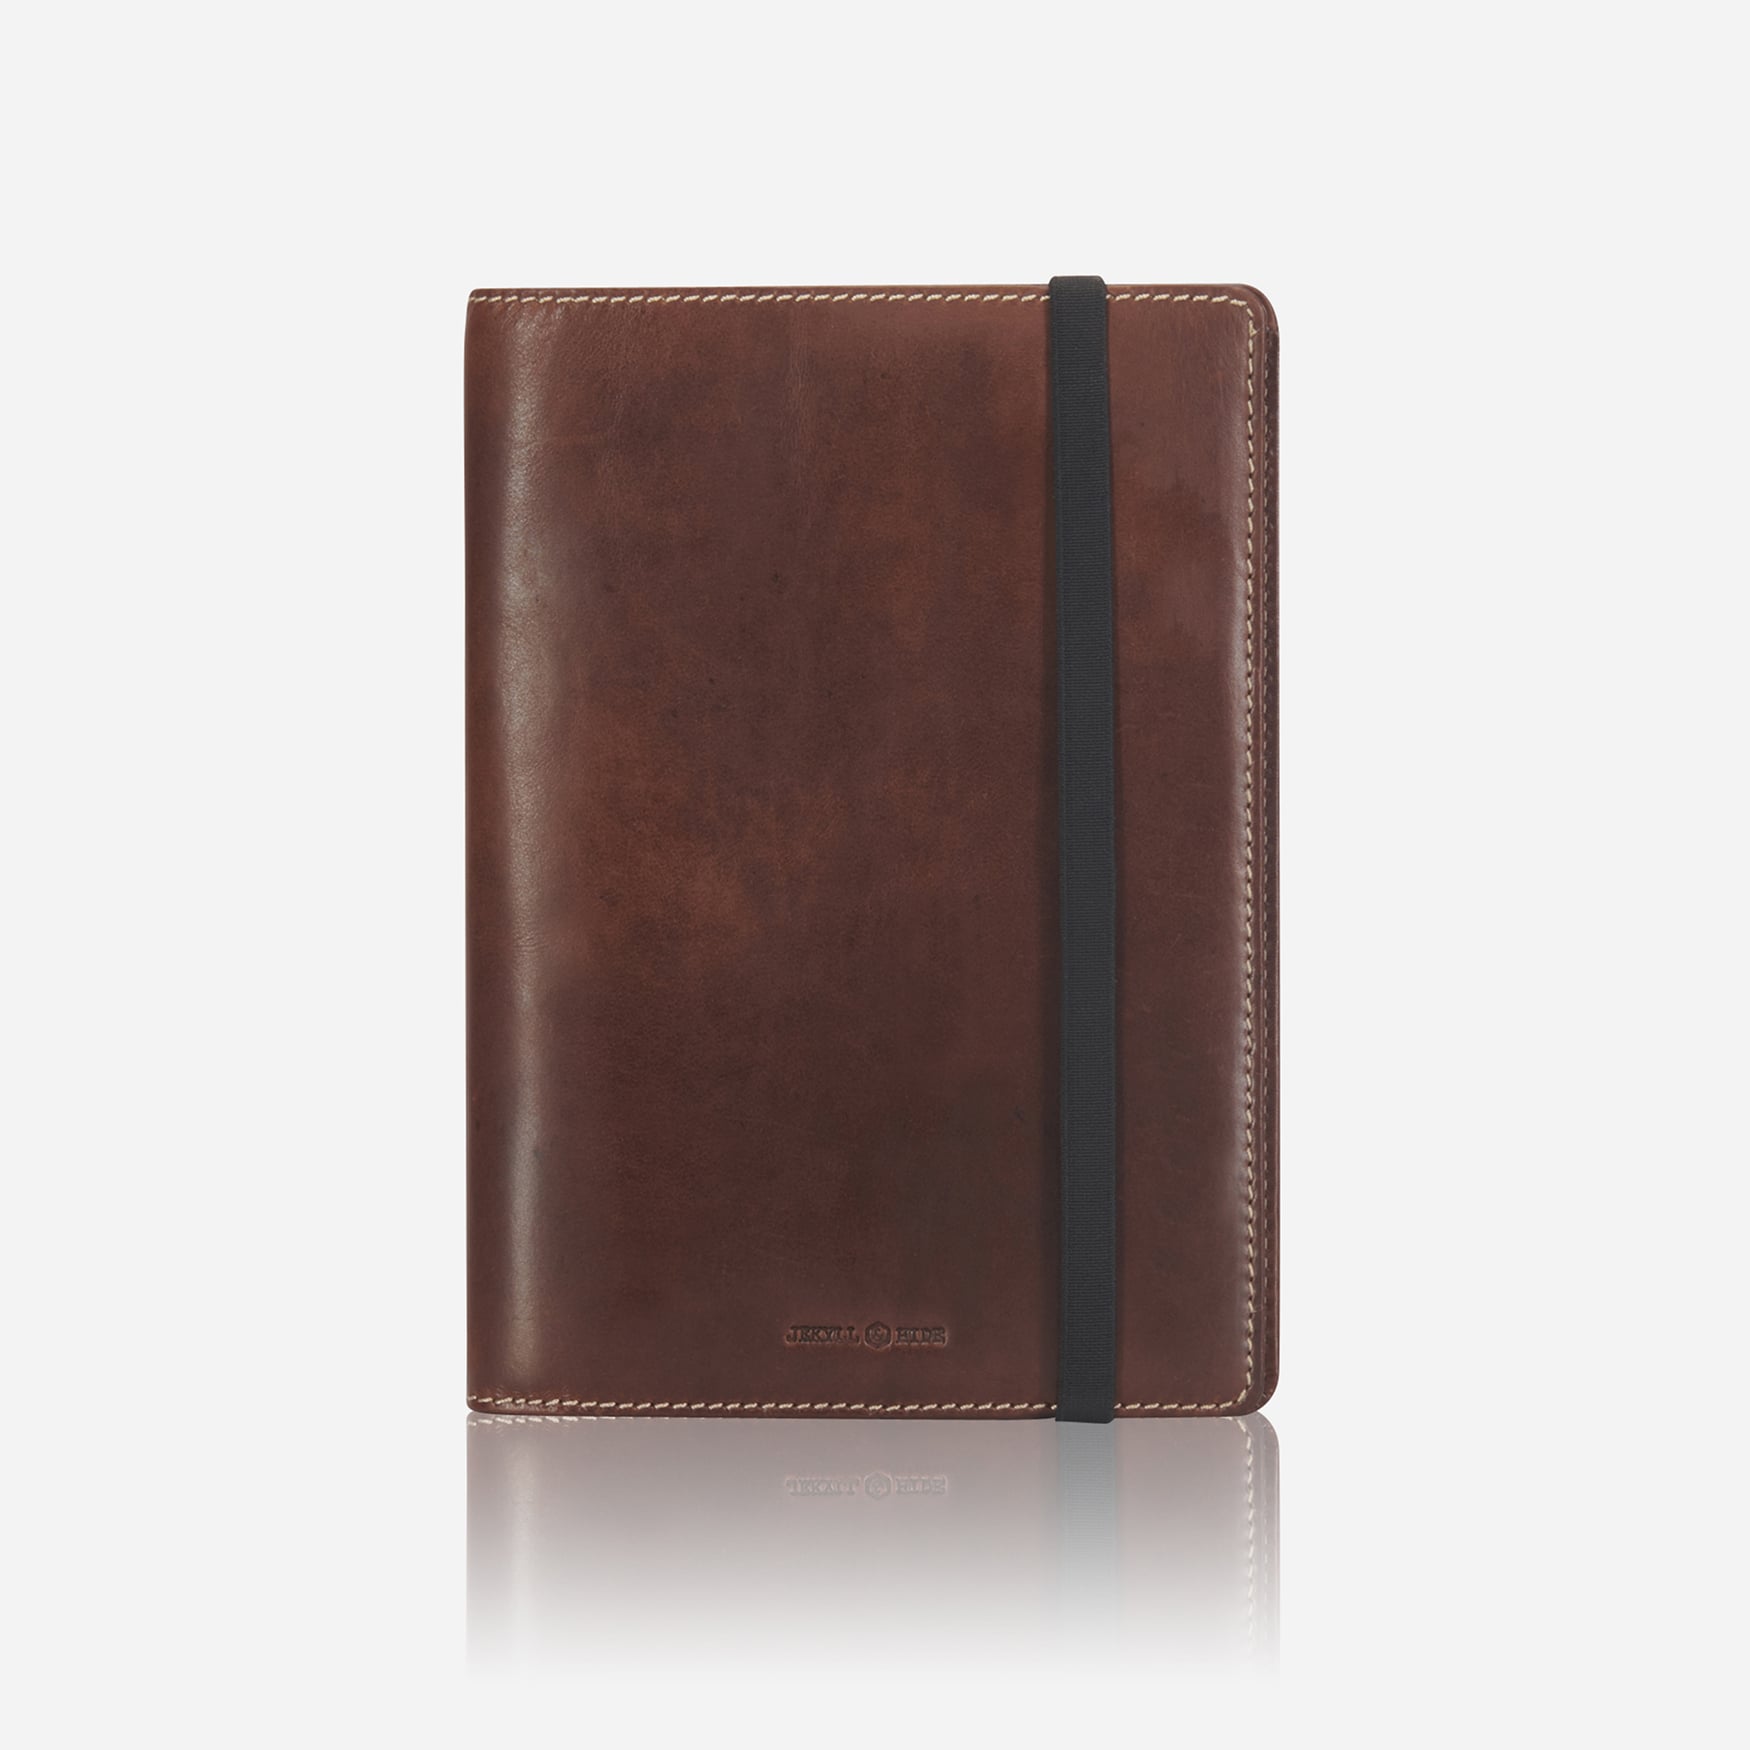 Leather A5 Notebook Cover, Espresso